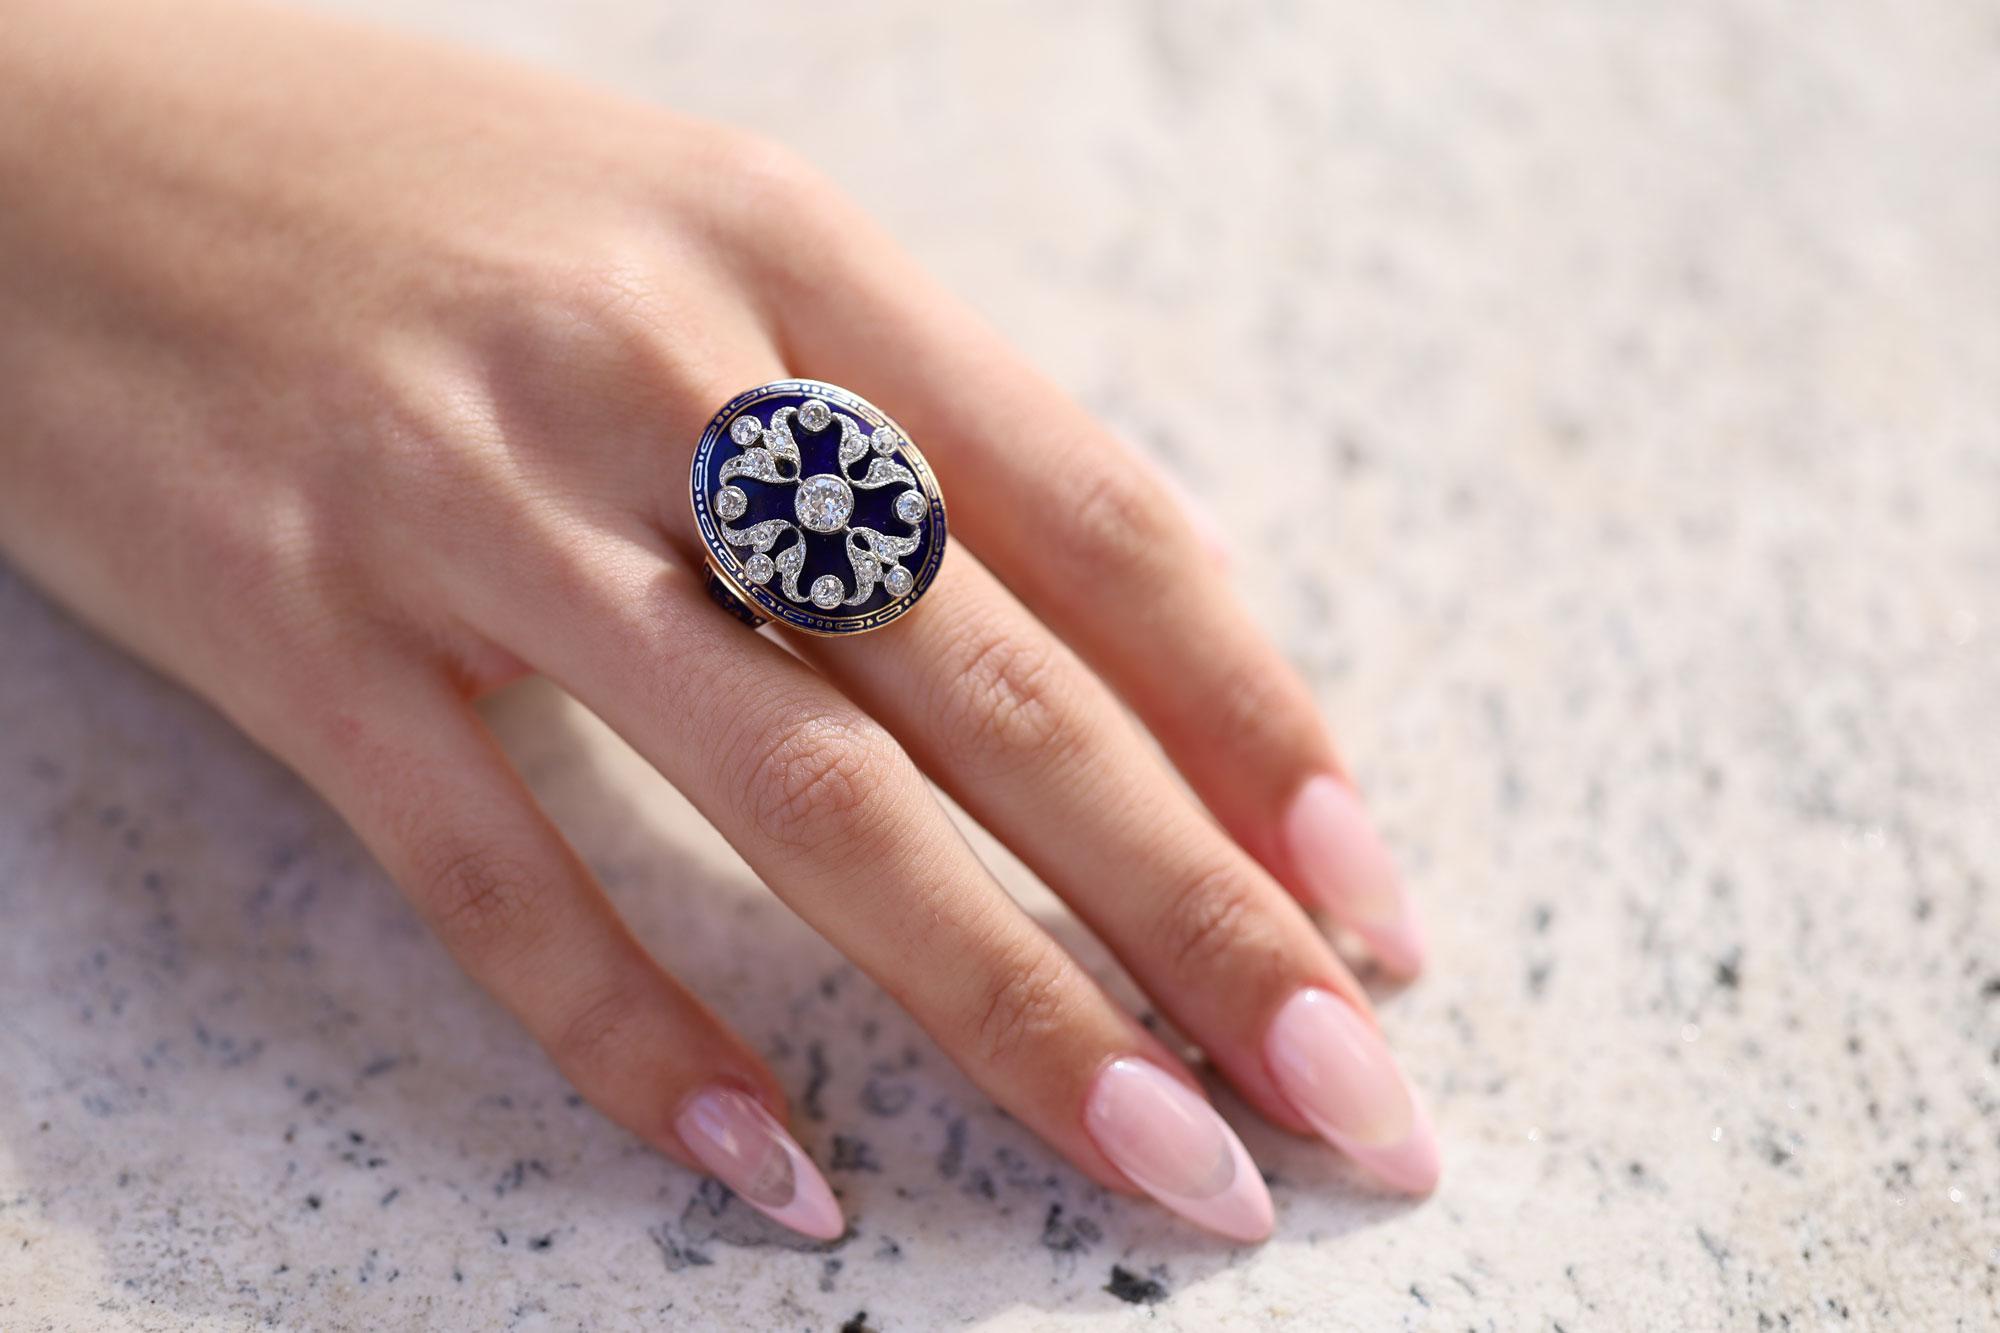 Appearing as if pulled from a treasure chest, this authentic, Edwardian antique cocktail ring is a coveted heirloom. The deep blue enamel background is adorned with a scrolling diamond shield of highly worked milgrained platinum along with an